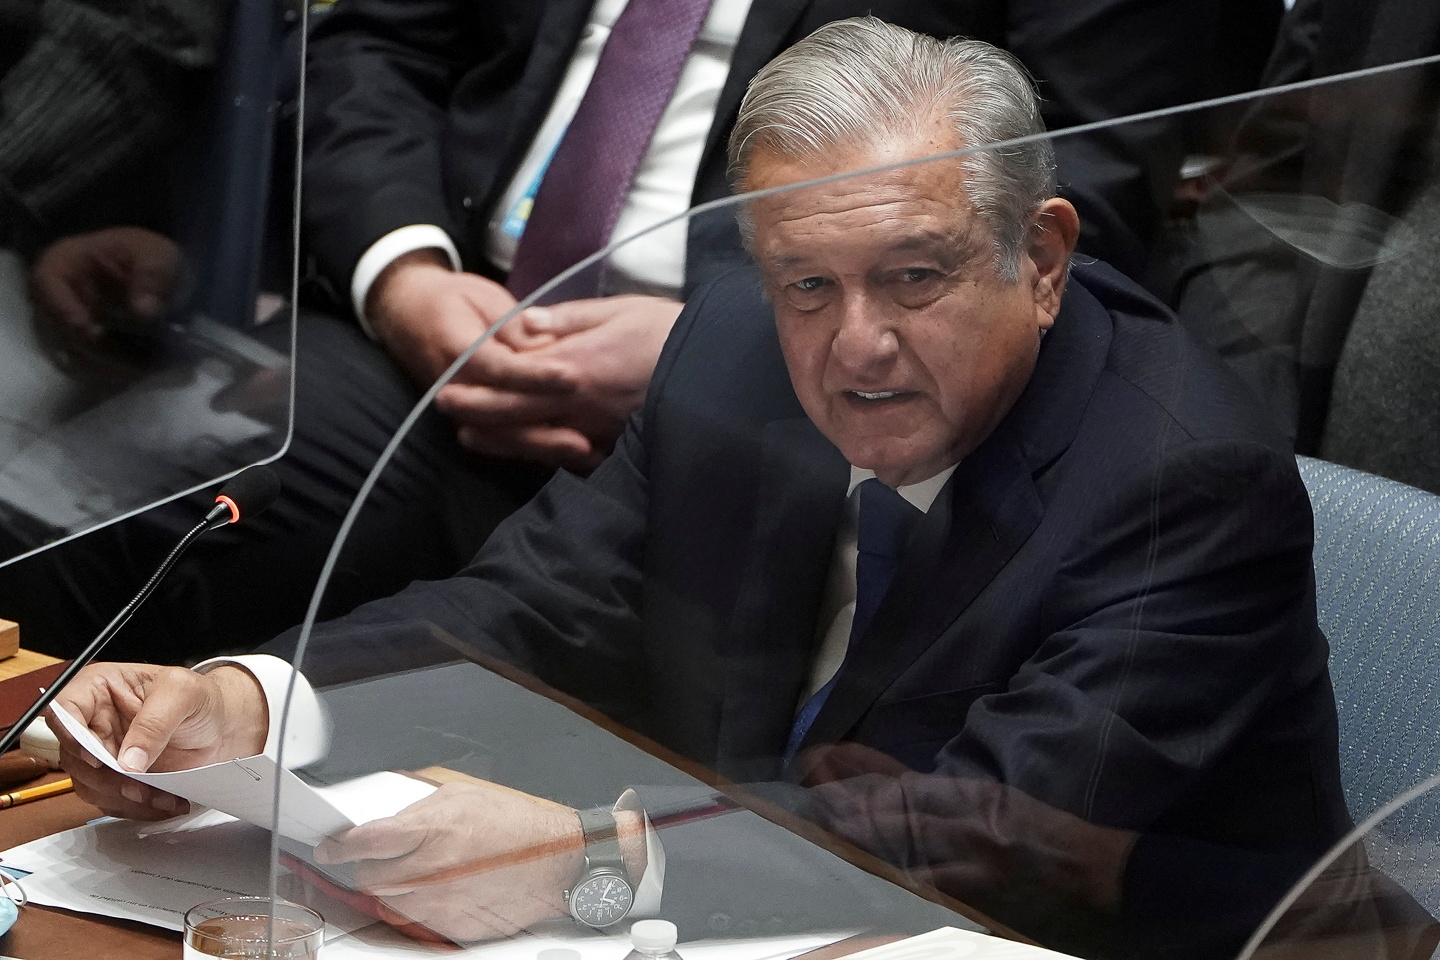 President of Mexico Andres Manuel Lopez Obrador speaks at the United Nations in the Manhattan borough of New York City, New York, U.S., November 9, 2021.  REUTERS/Carlo Allegri